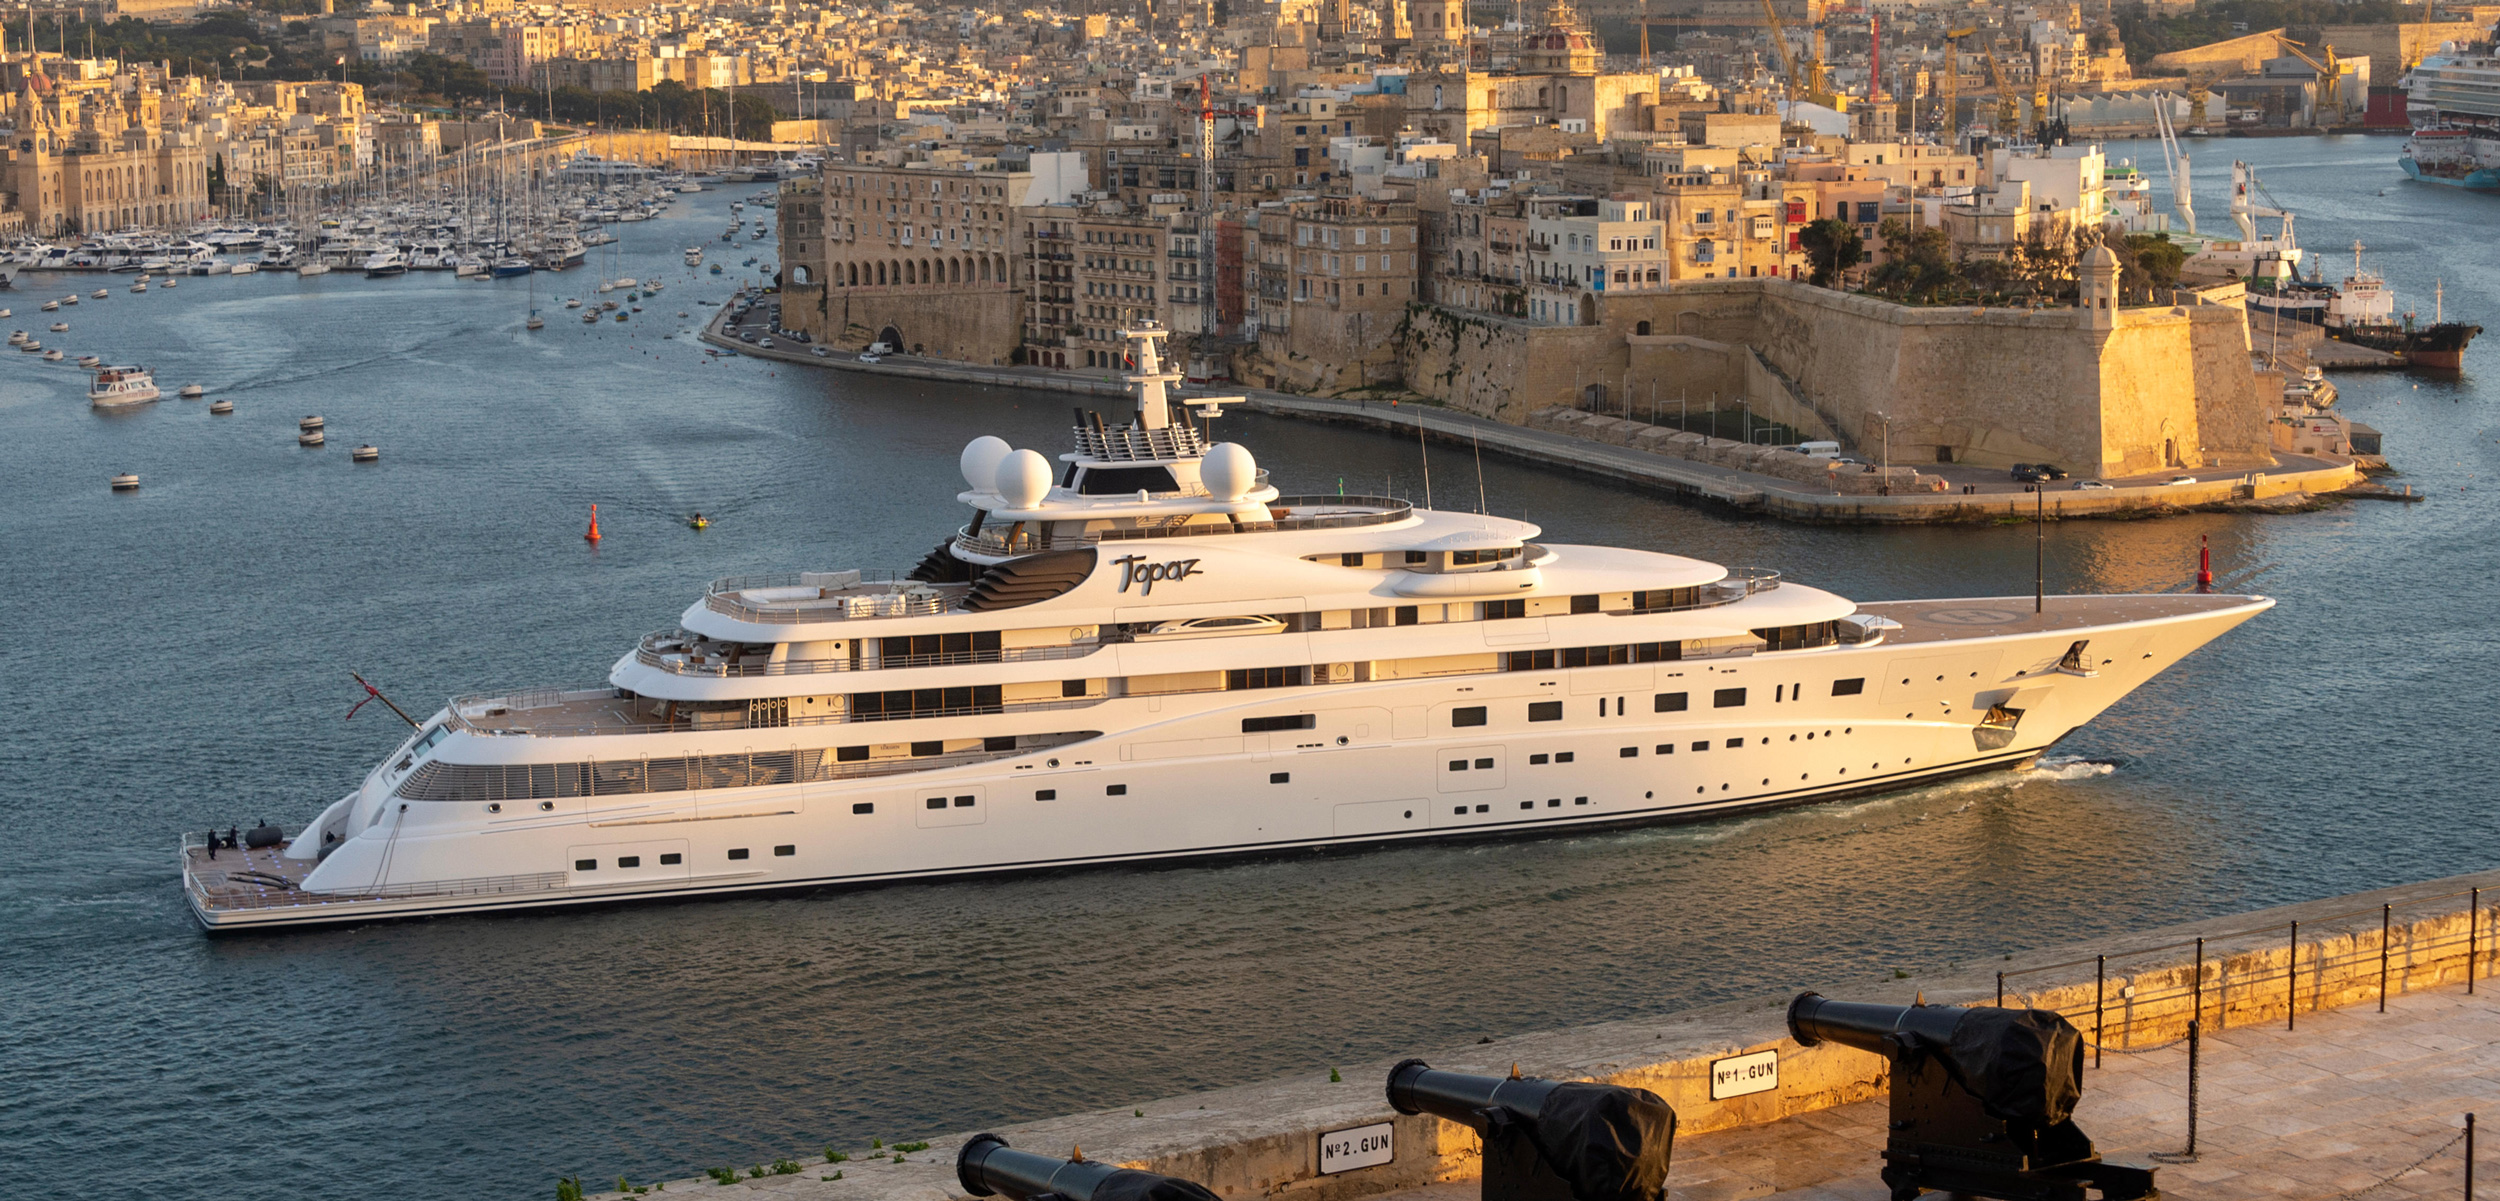 A privately owned megayacht enters the harbor at Valletta, Malta